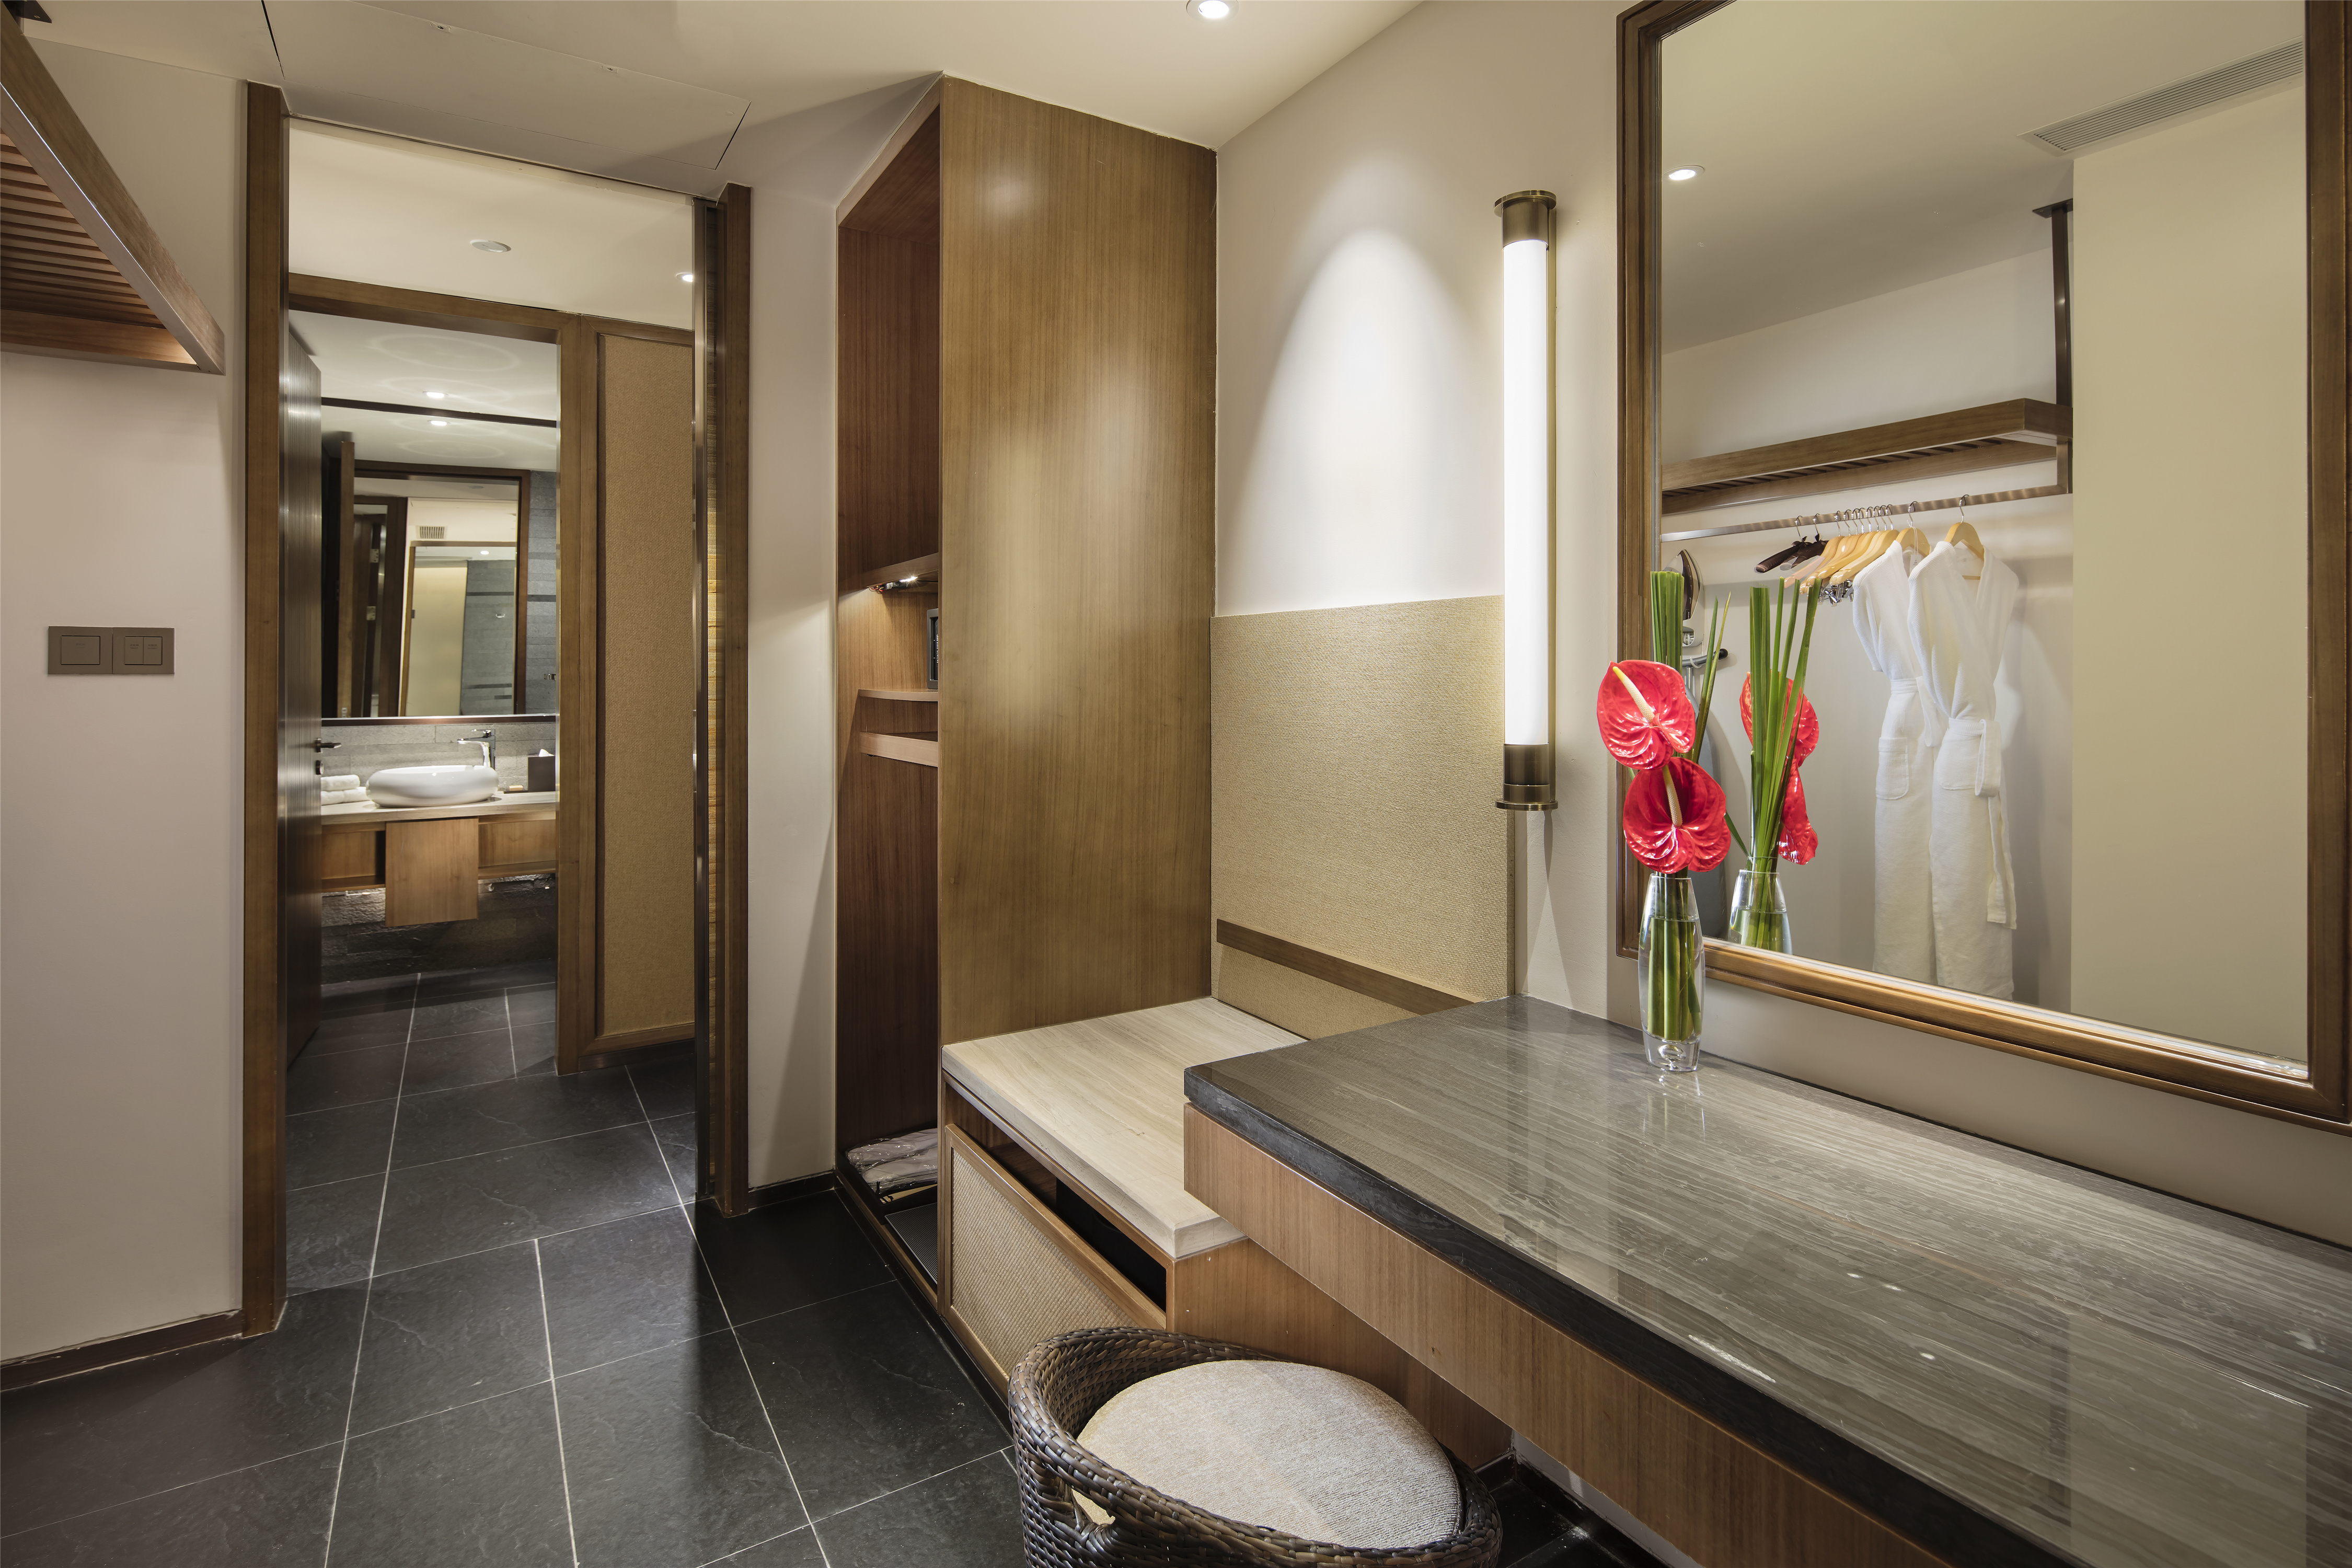 Cloakroom with Bathroom View